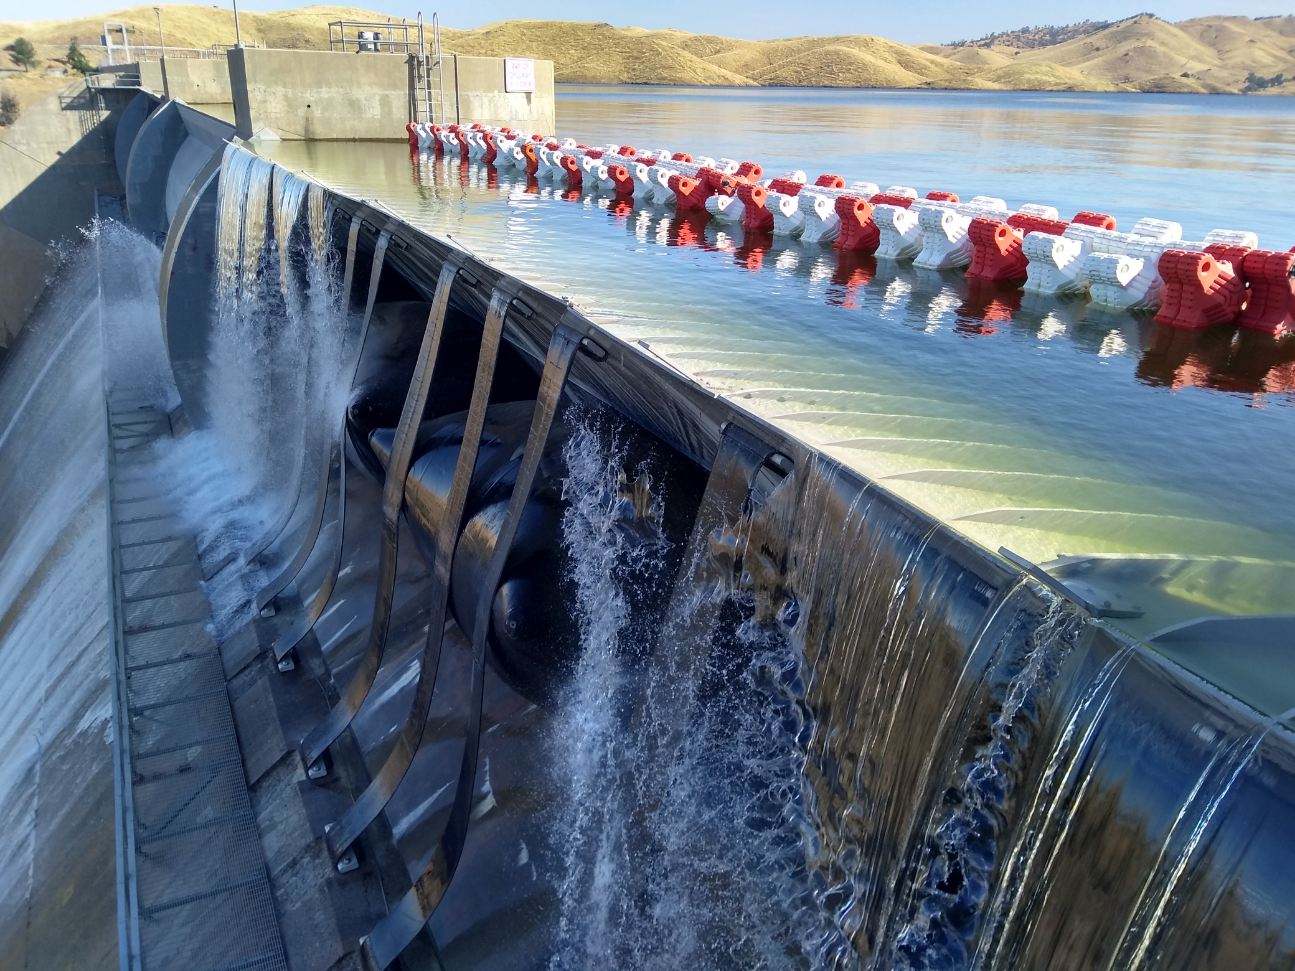 Friant Dam spillway gate testing July 9, 2019 (Reclamation photo by Duane Stroup)